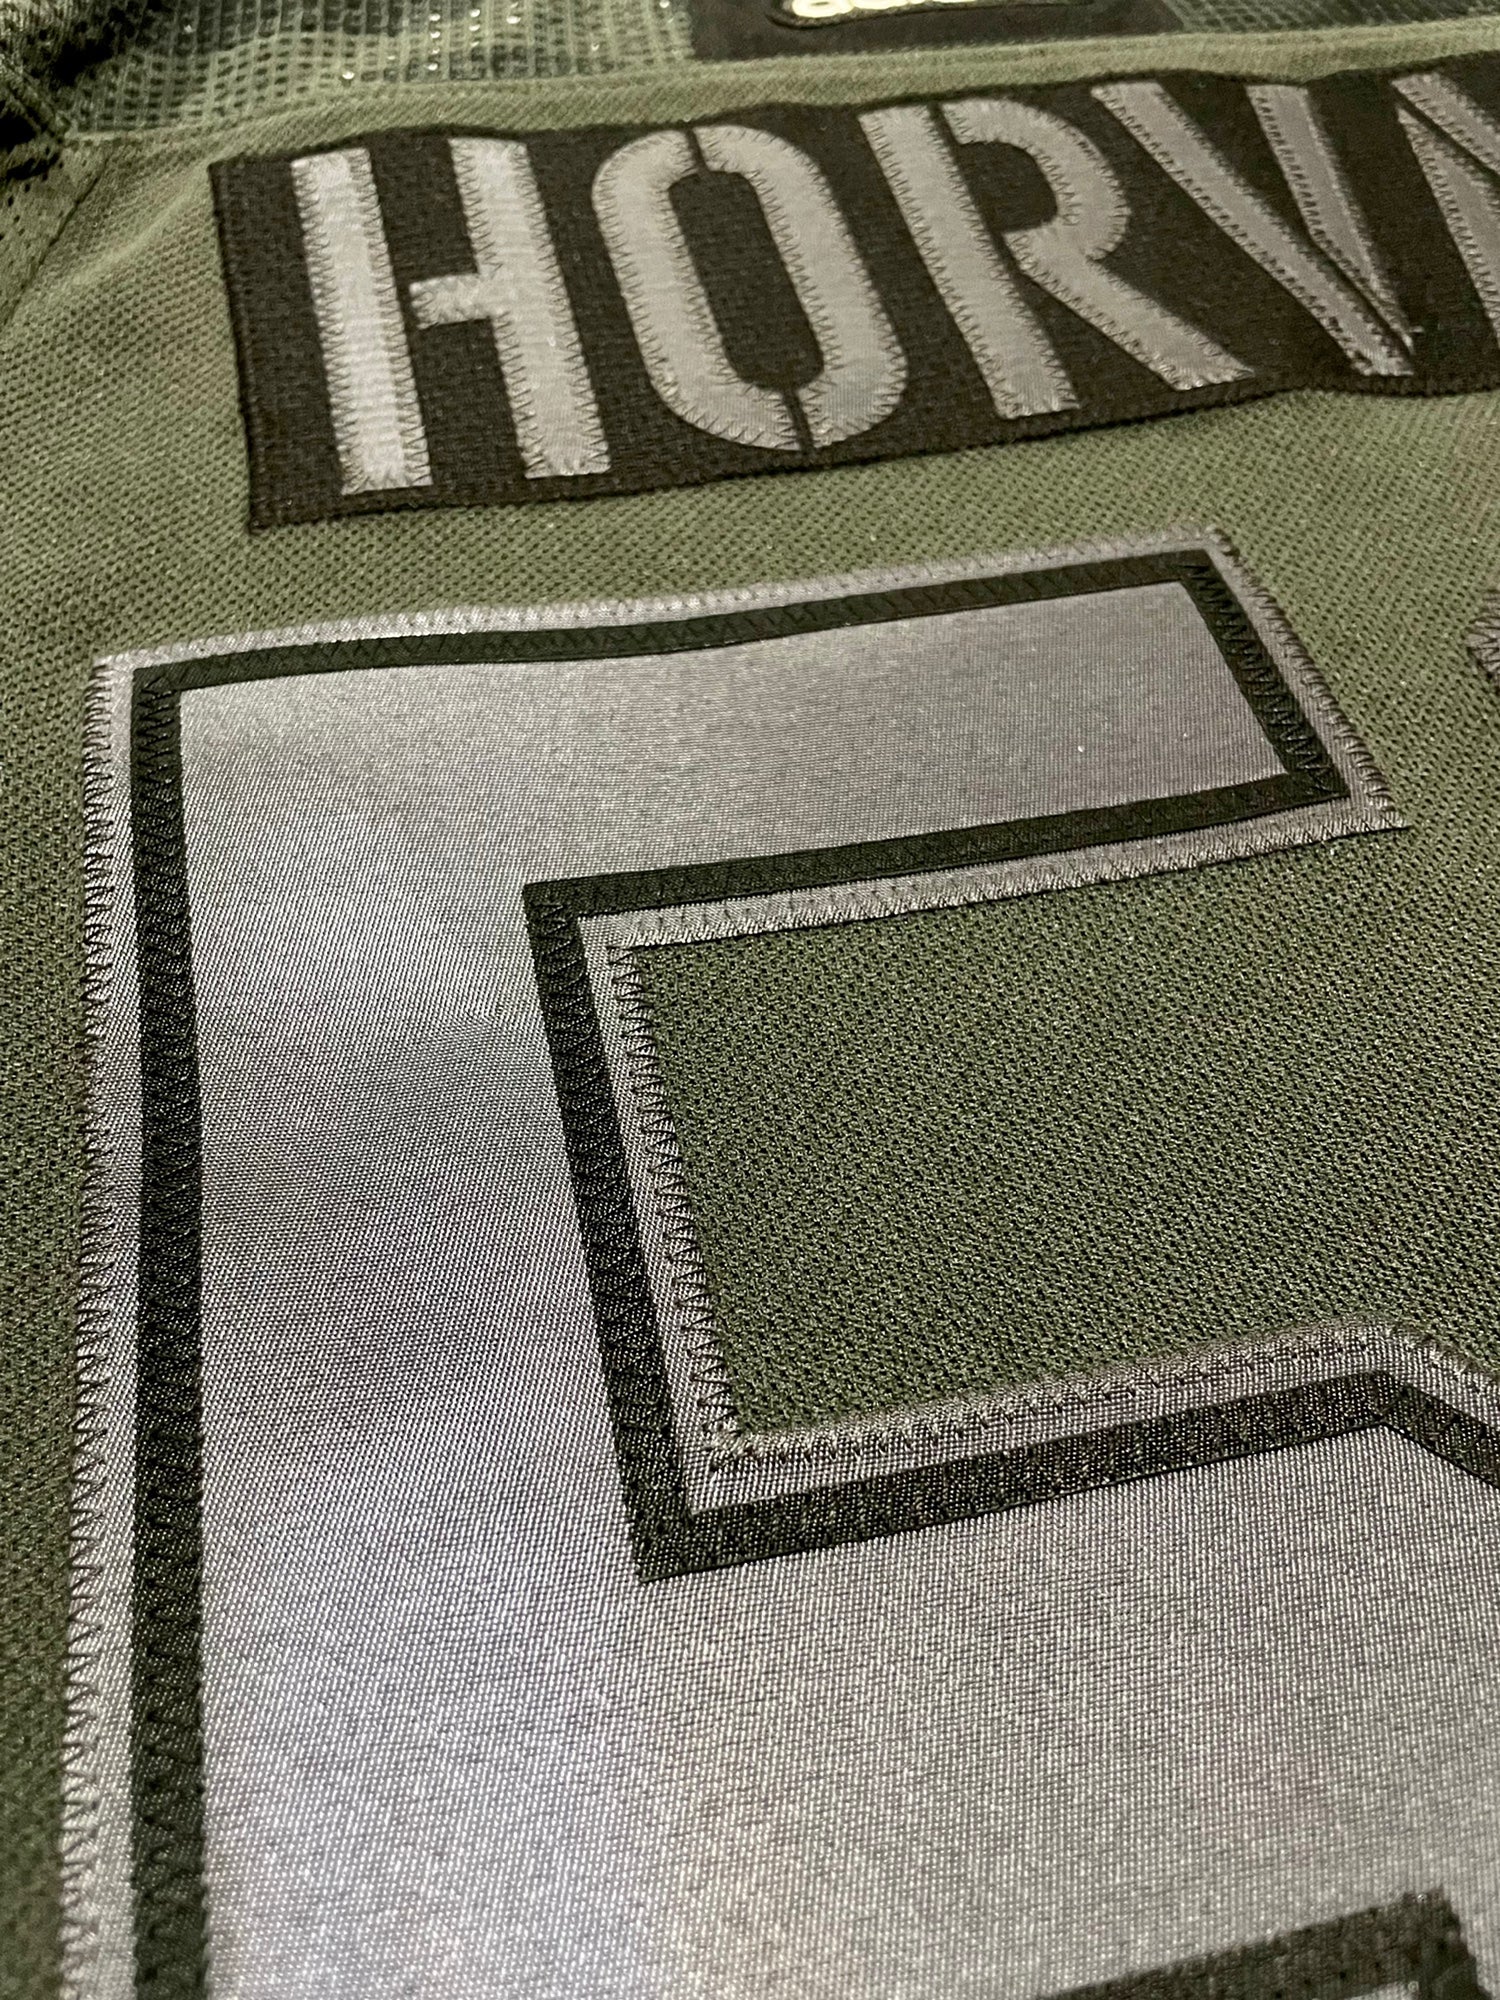 Stitched adidas Bo Horvat Jersey with both a C and the Canucks 50 patch.  Definitely the highlight of my Christmas and I'm glad the first NHL jersey  I've ever gotten has my